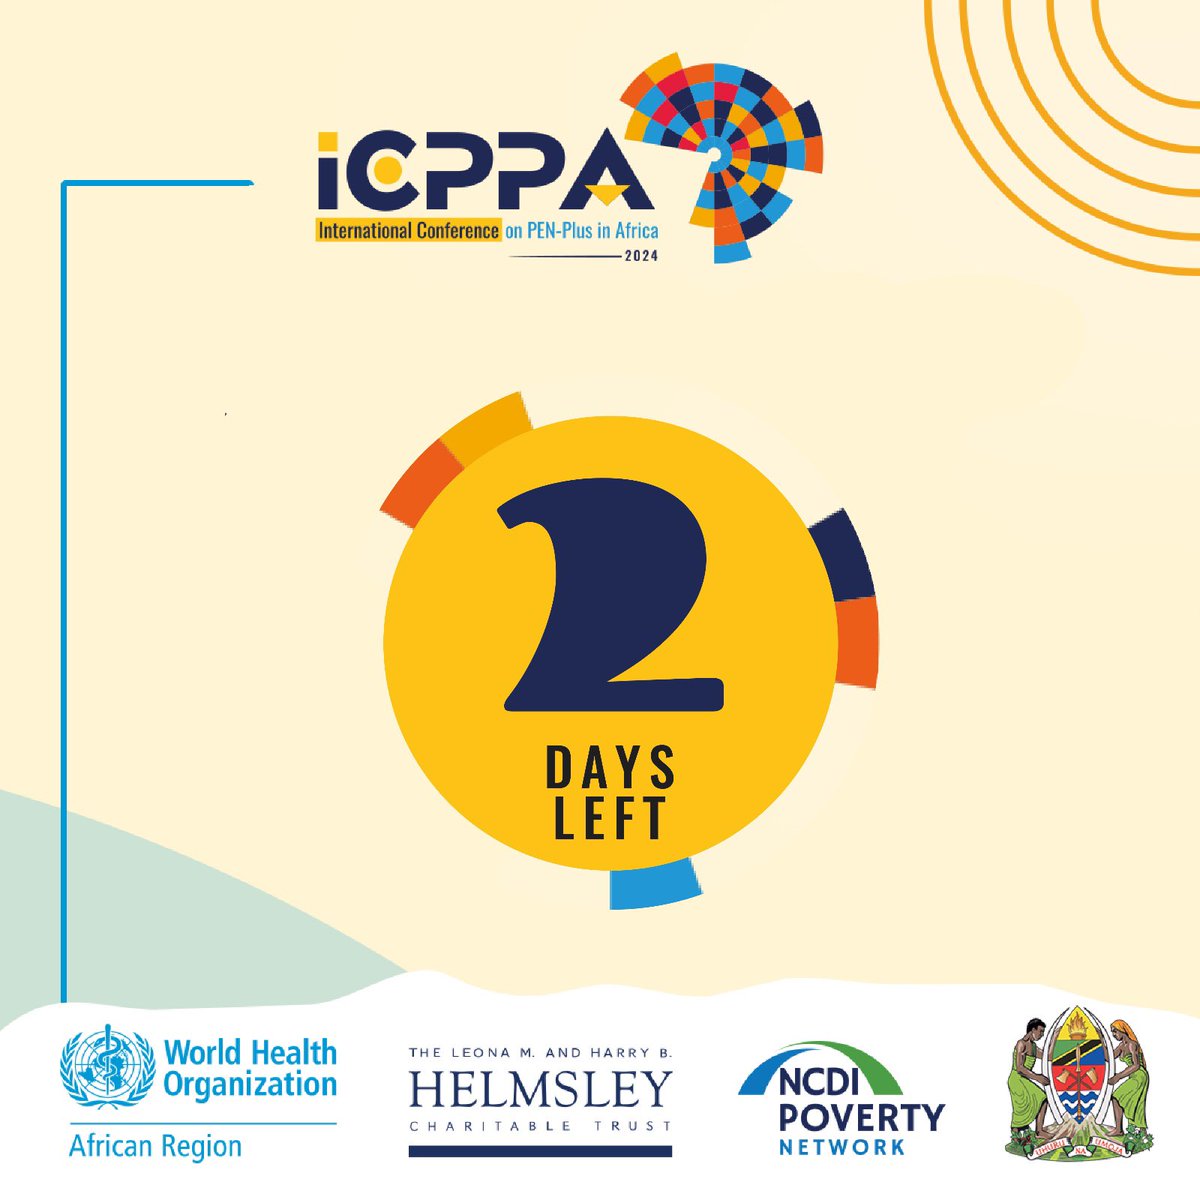 We must work to improve access to #NCDs care services for all, regardless where people live.

#ICPPA2024 starts in 2 days!

🗓️ Join us from April 23-25 as we explore ways to #BeatNCDs in Africa.

Register here: bit.ly/3JqN0zN

#EndingDiseasesInAfrica